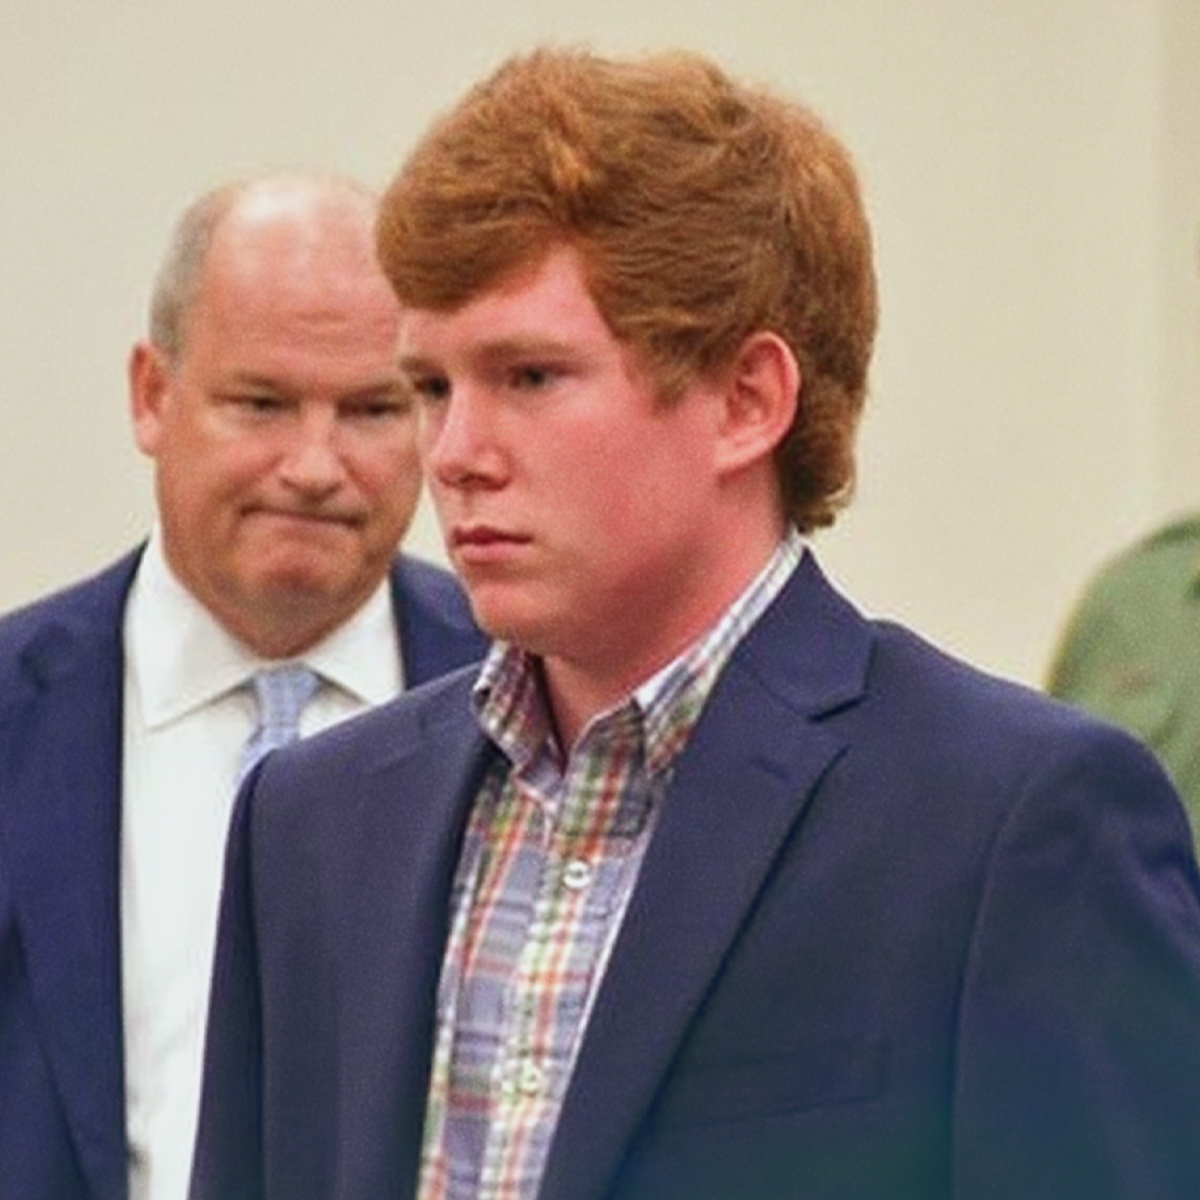 Buster Murdaugh denies any involvement with death of high school